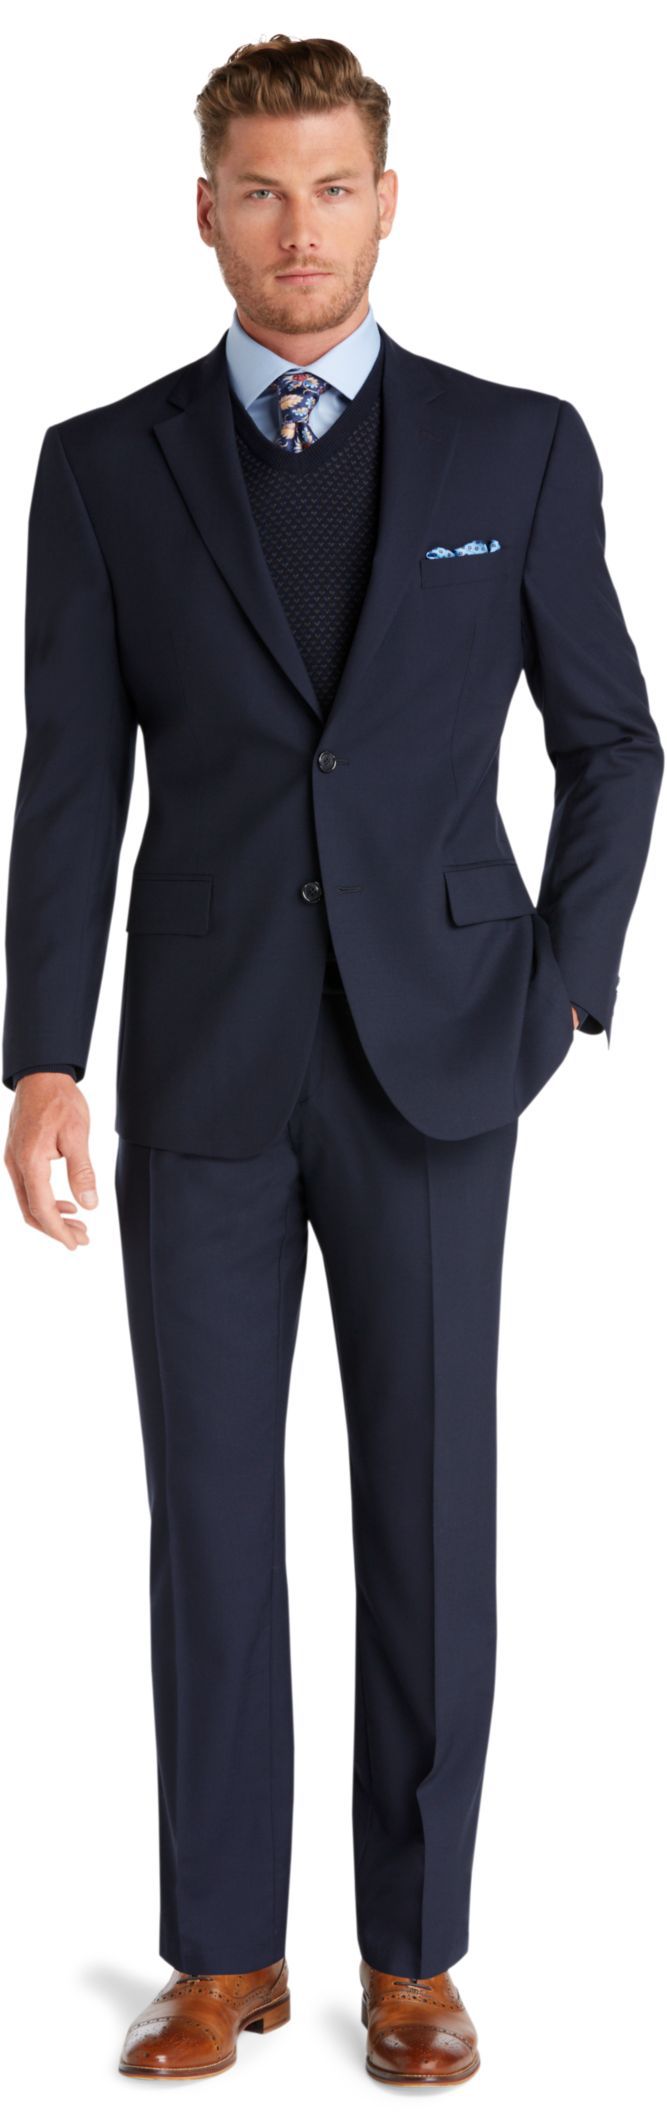 Executive Collection Traditional Fit Suit - Big & Tall - Big & Tall ...